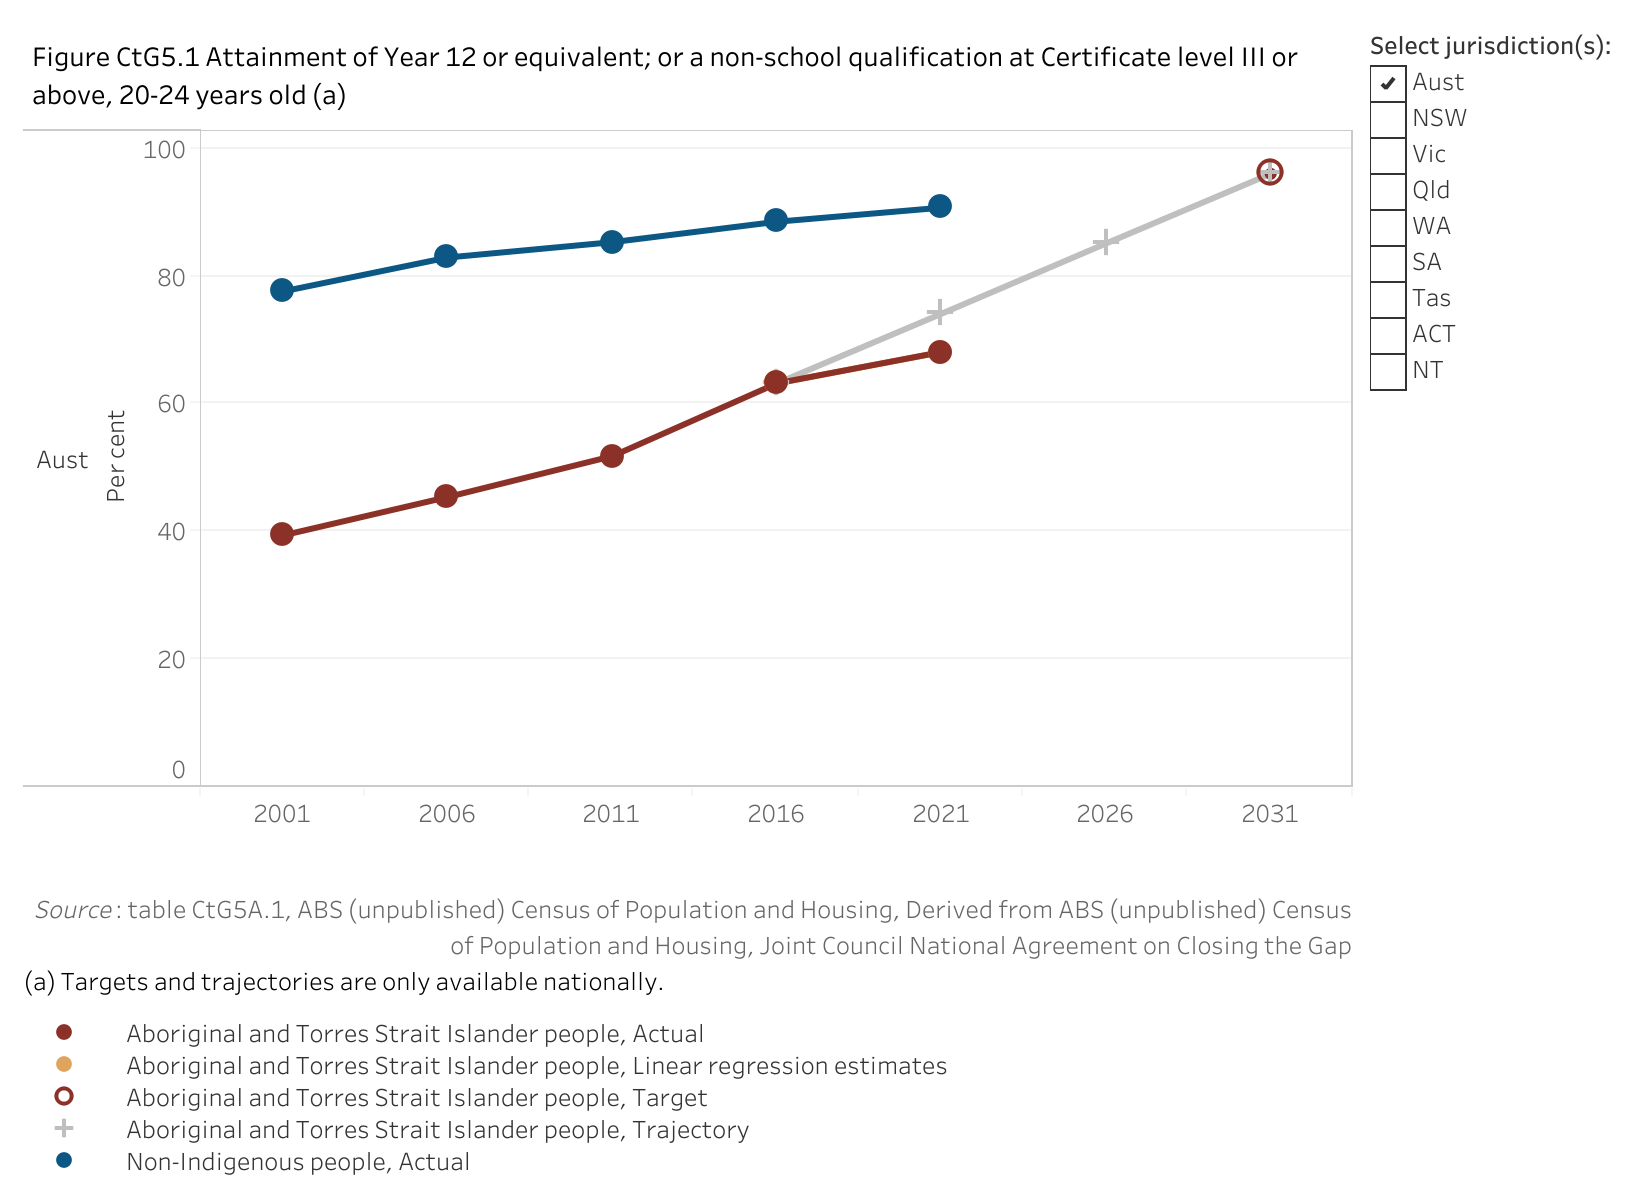 Figure CtG5.1 shows the attainment of Year 12 or equivalent; or a non-school qualification at Certificate level III or above, 20 to 24 years old. More details can be found within the text near this image.